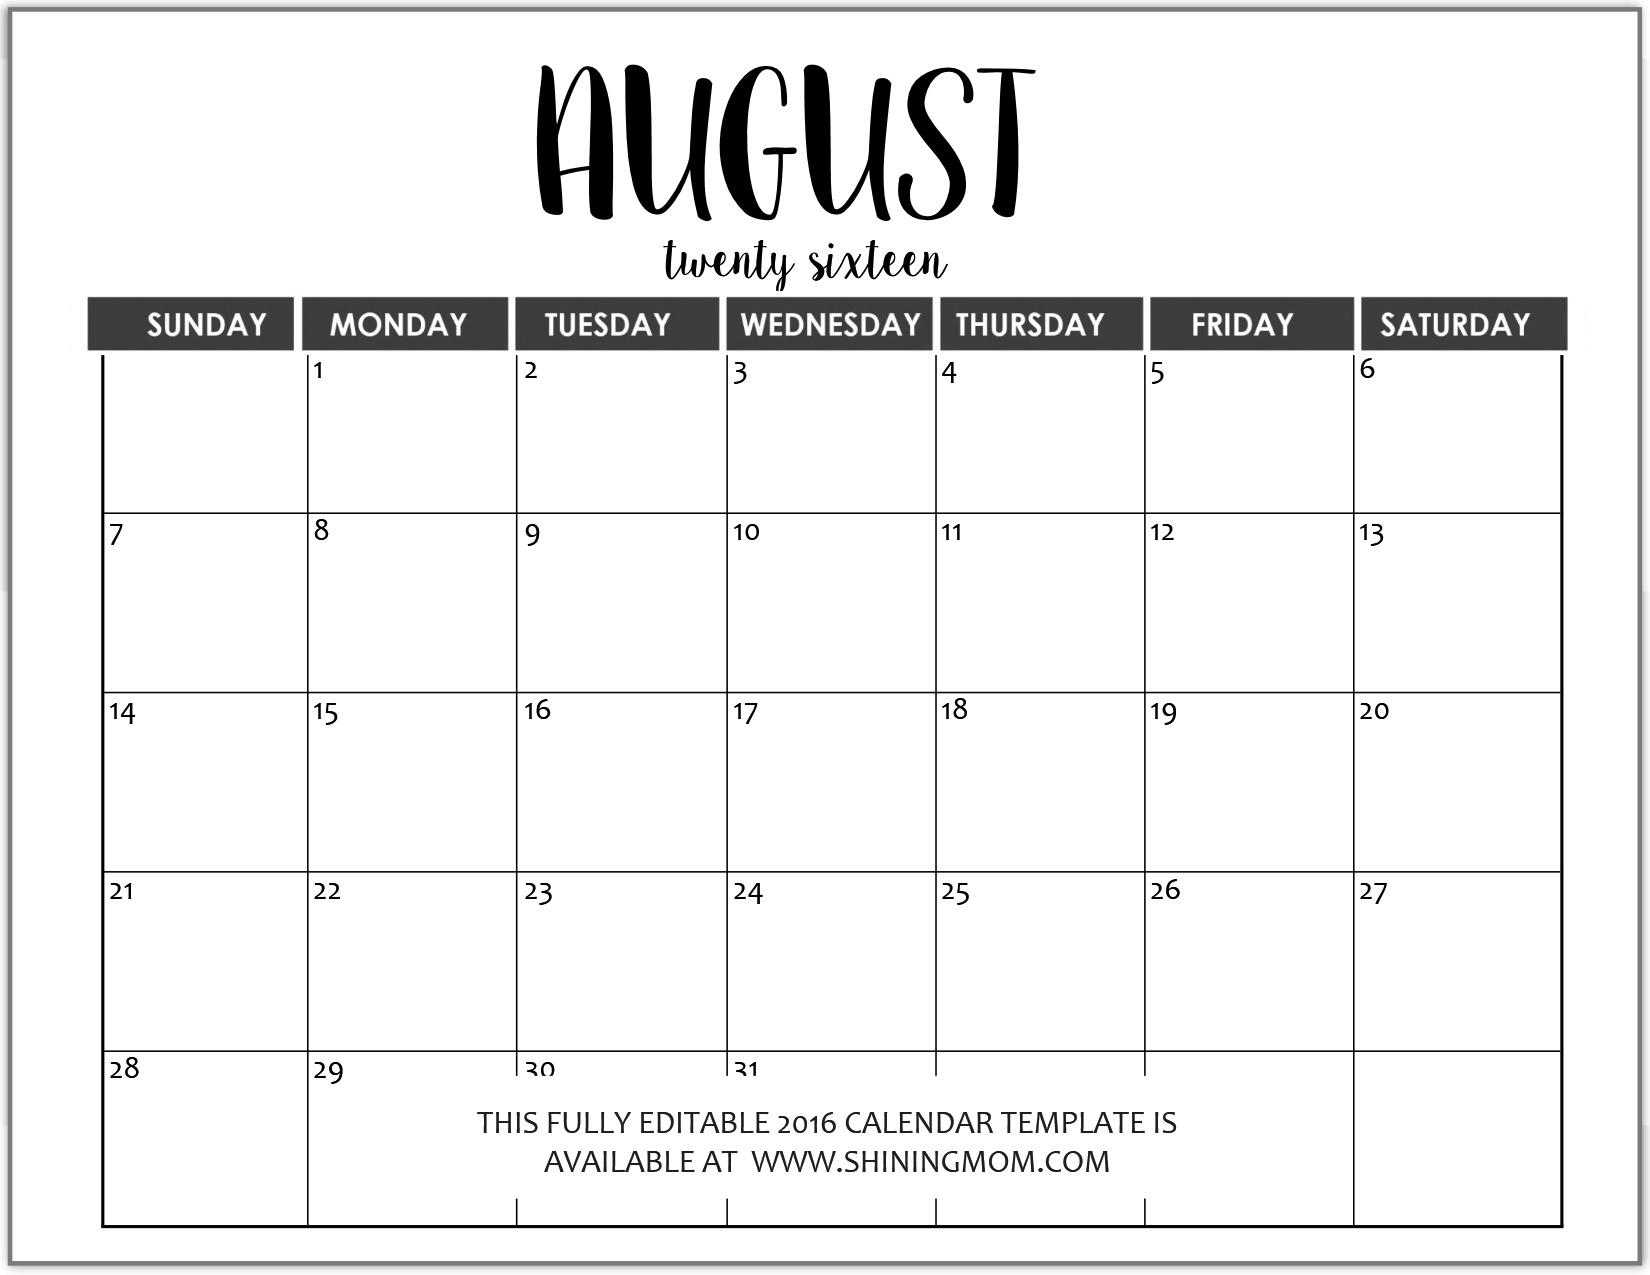 Just In: Fully Editable 2016 Calendar Templates In Ms Word Calendar Template Ms Word